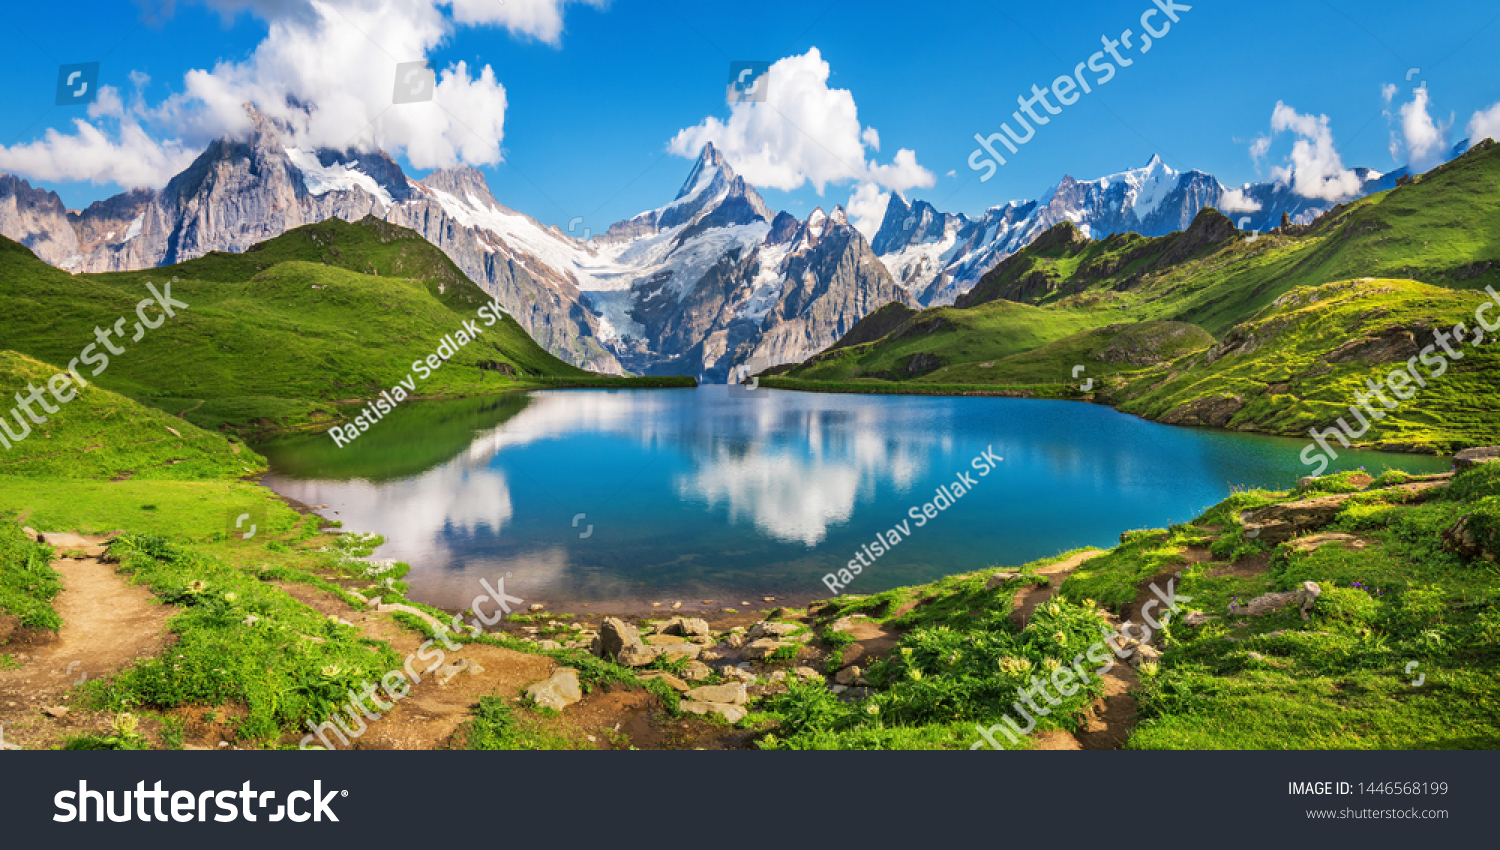 Sunrise  view on Bernese range above Bachalpsee lake. Popular tourist attraction. Location place Swiss alps, Grindelwald valley, Europe. 